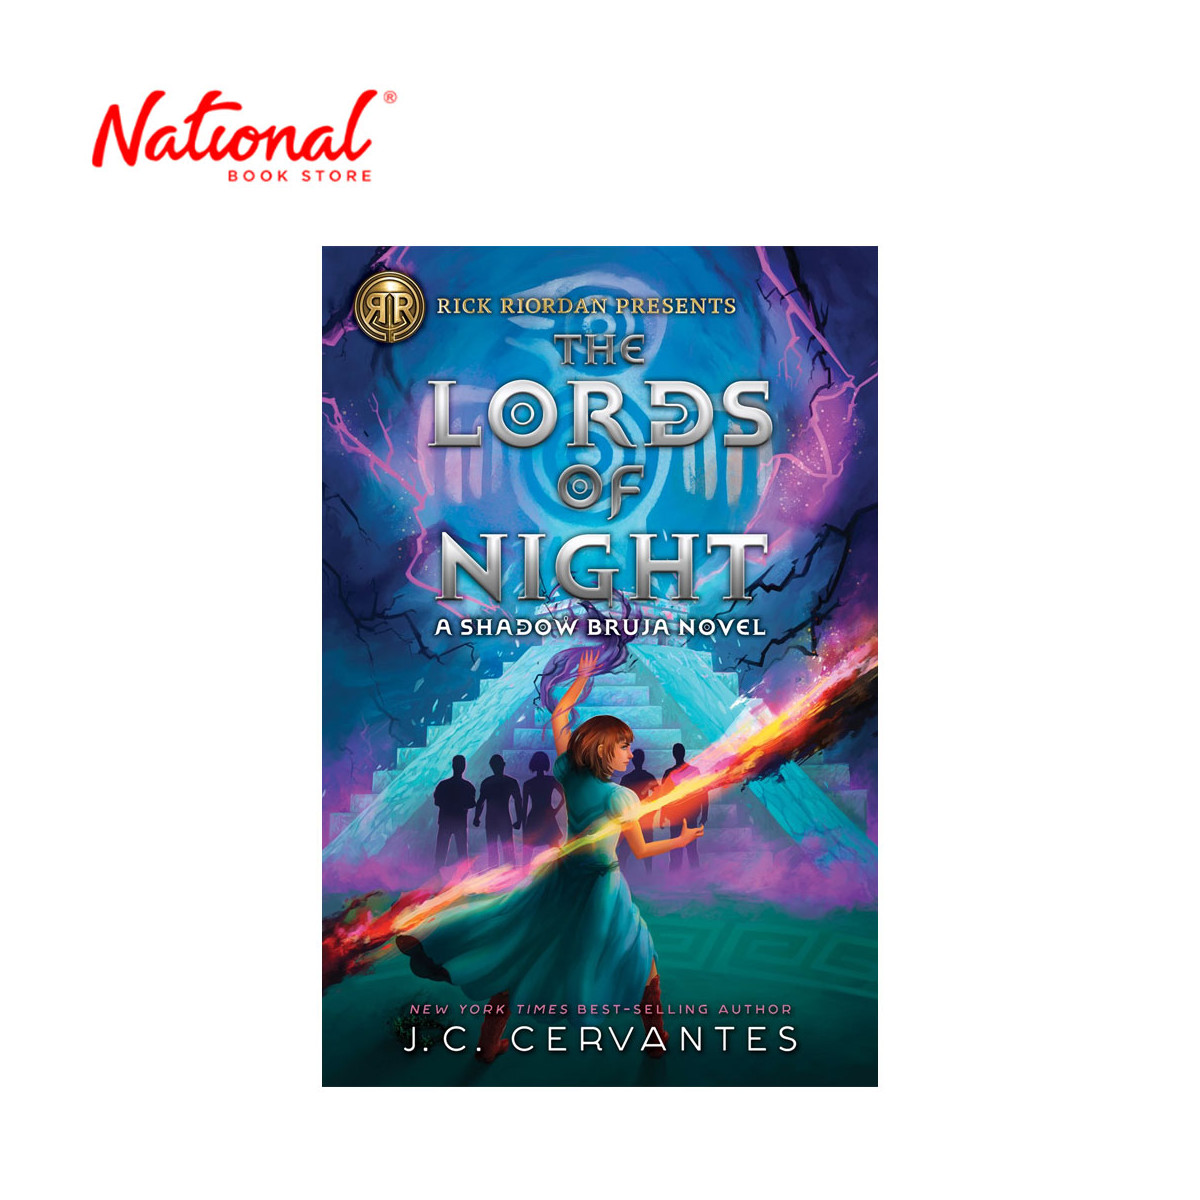 Rick Riordan Presents: Lords Of Night Book 1 By J.C. Cervantes - Trade Paperback - Books for Kids